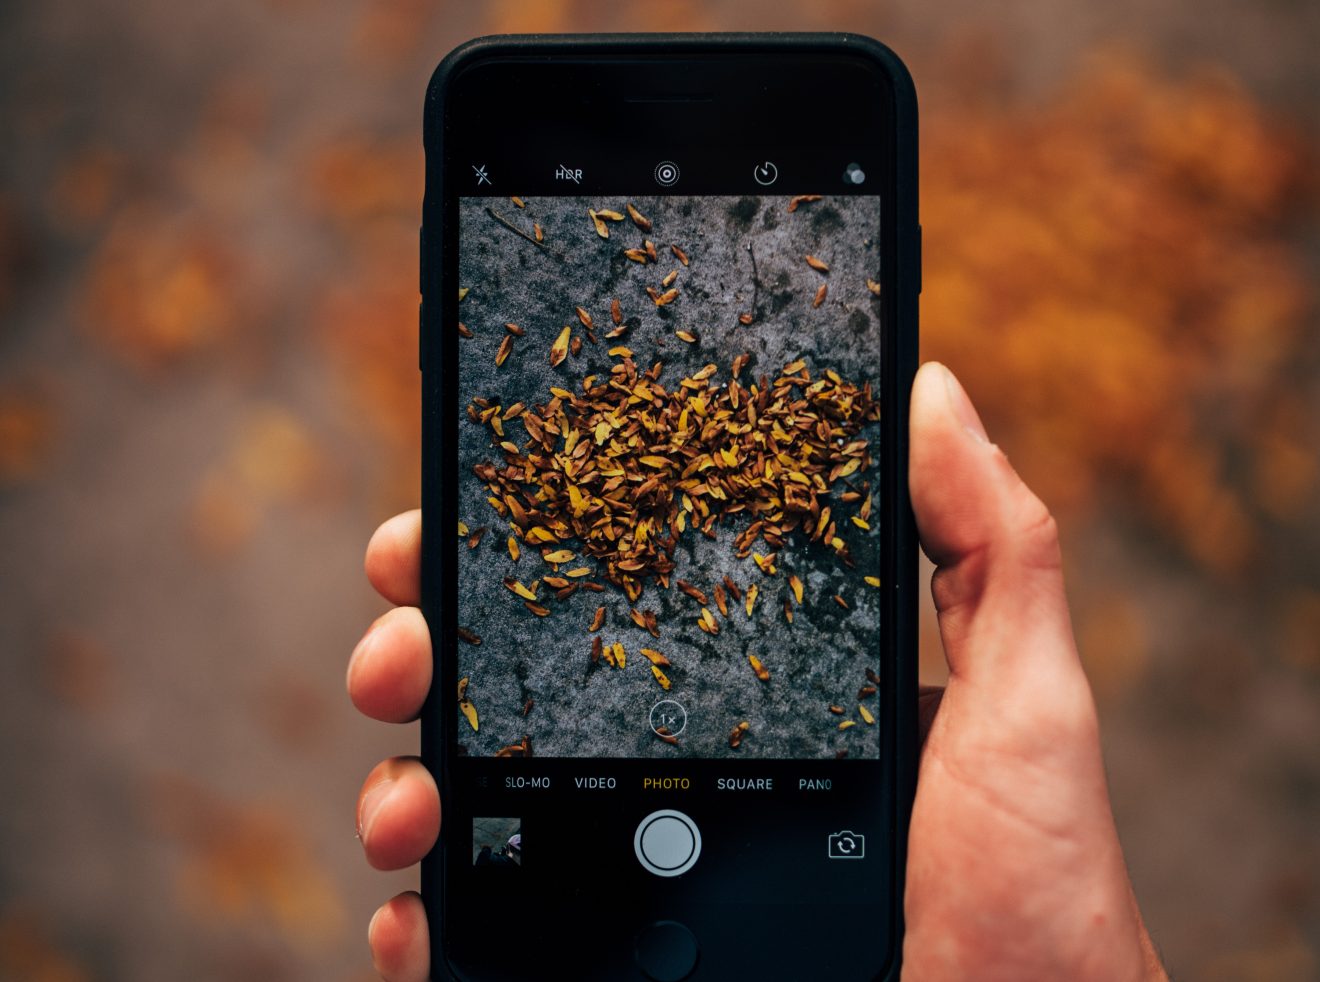 Masculine hand holds a large iPhone showing a pile of autumn leaves in the viewfinder.